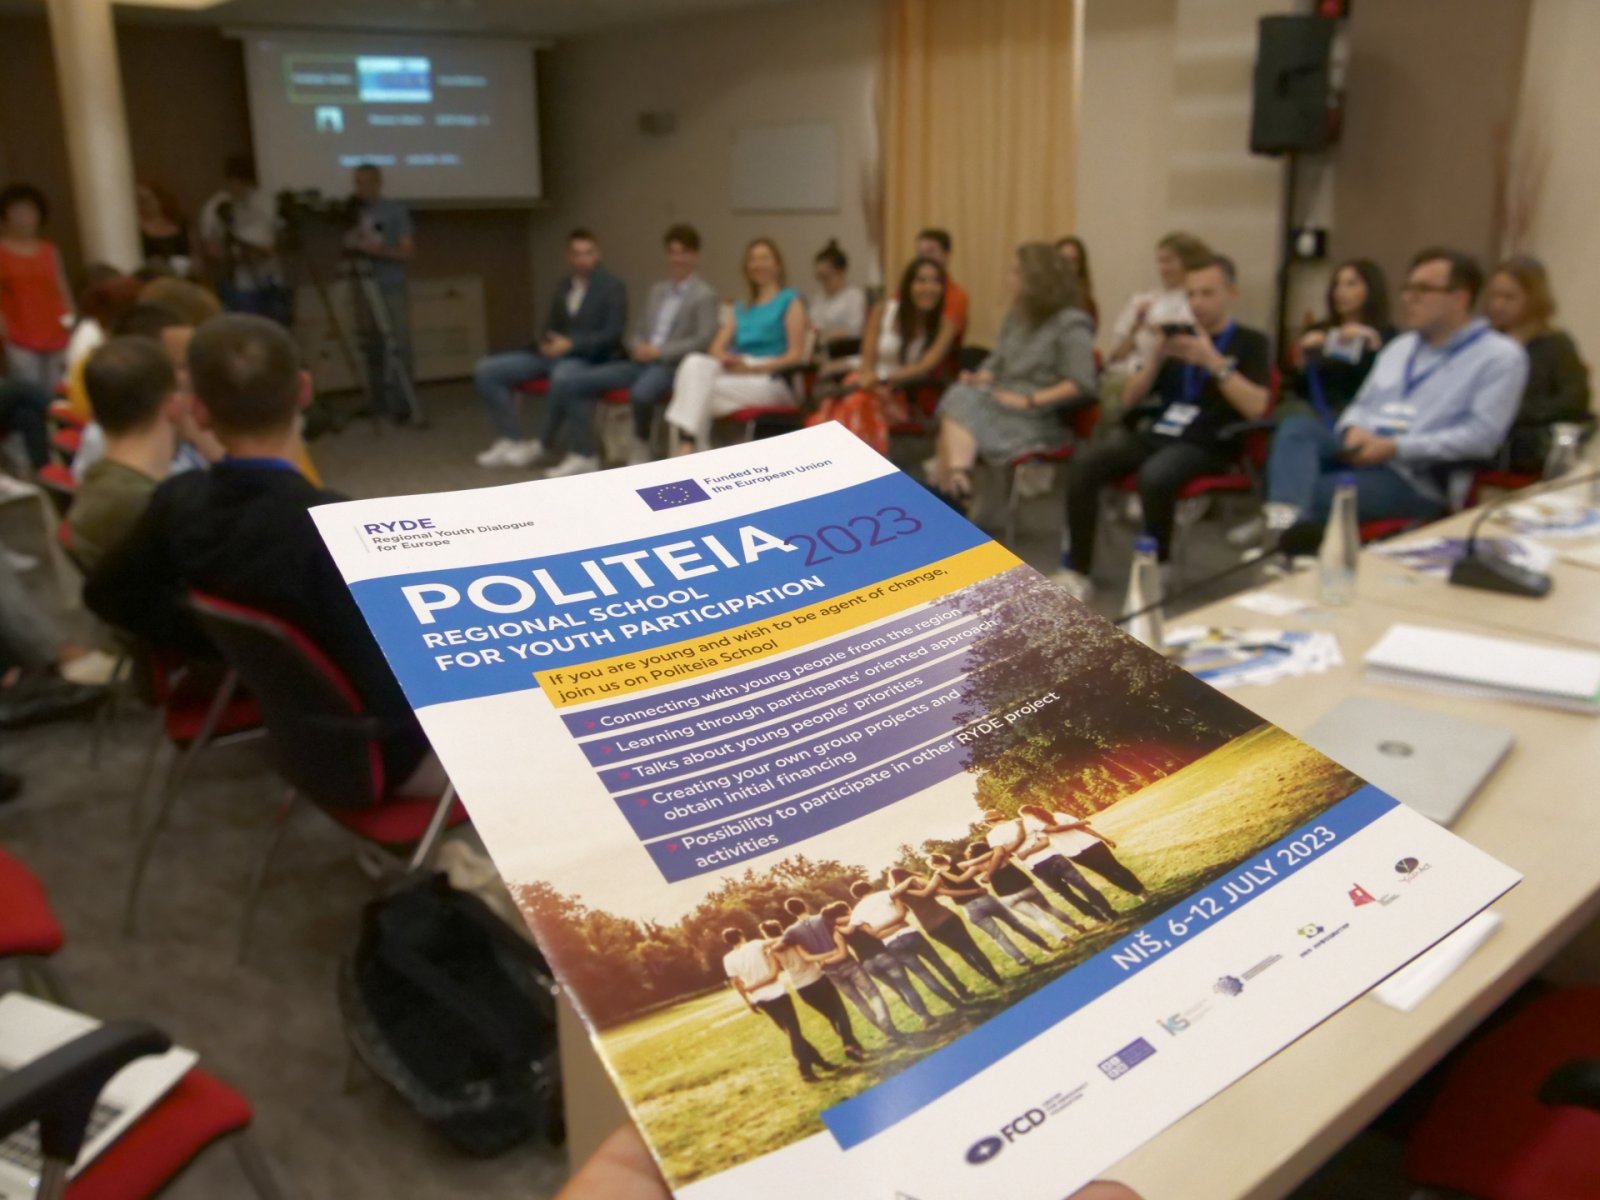 Opening of POLITEIA Regional School for Youth Participation 2023